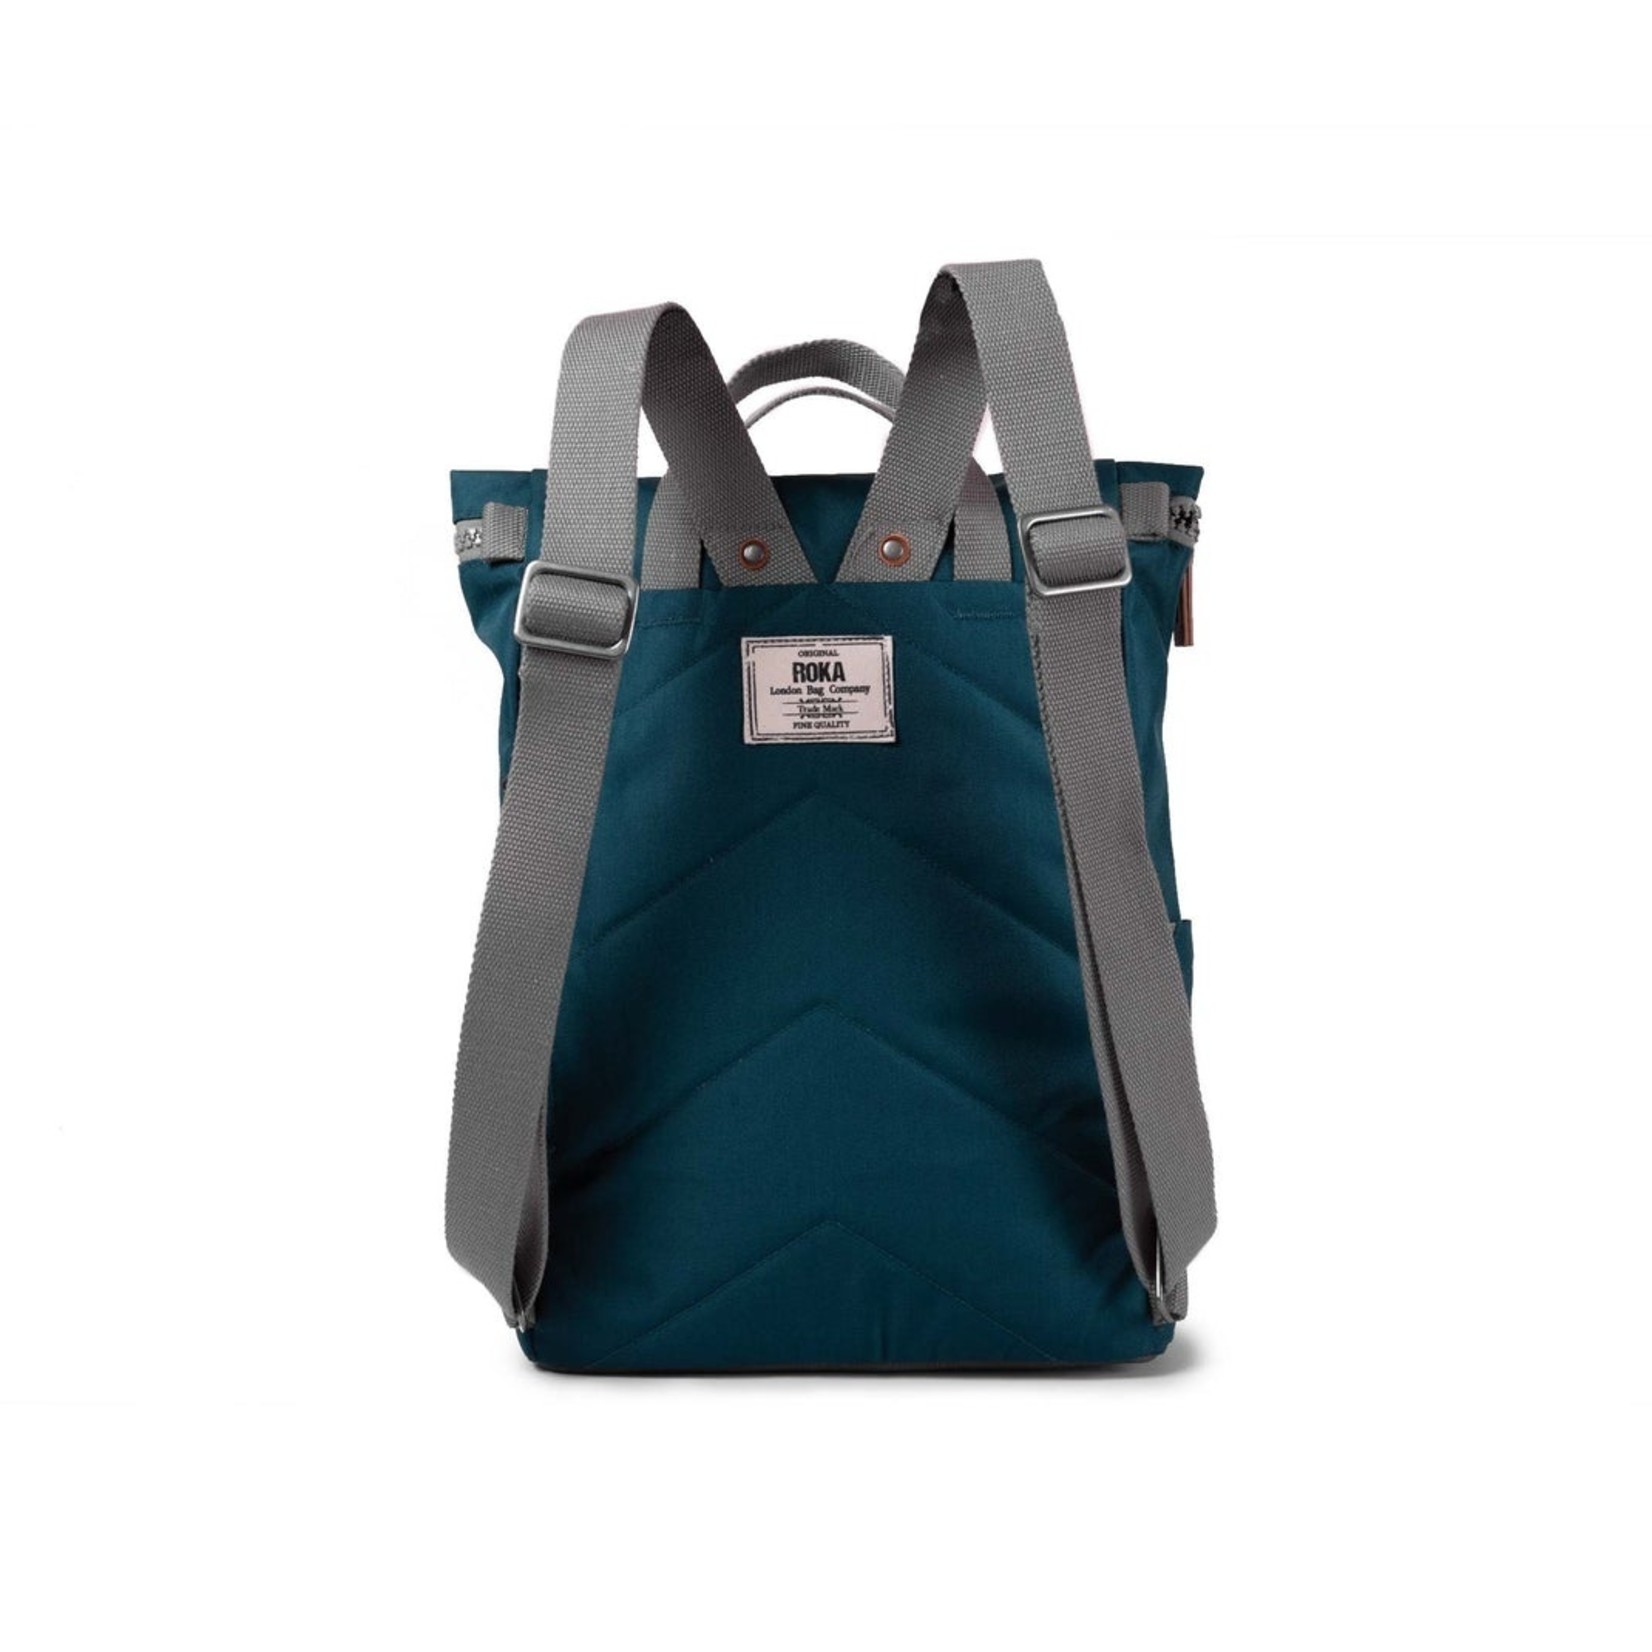 ROKA London Finchley A Medium Sustainable Teal  12-15 recycled bottles